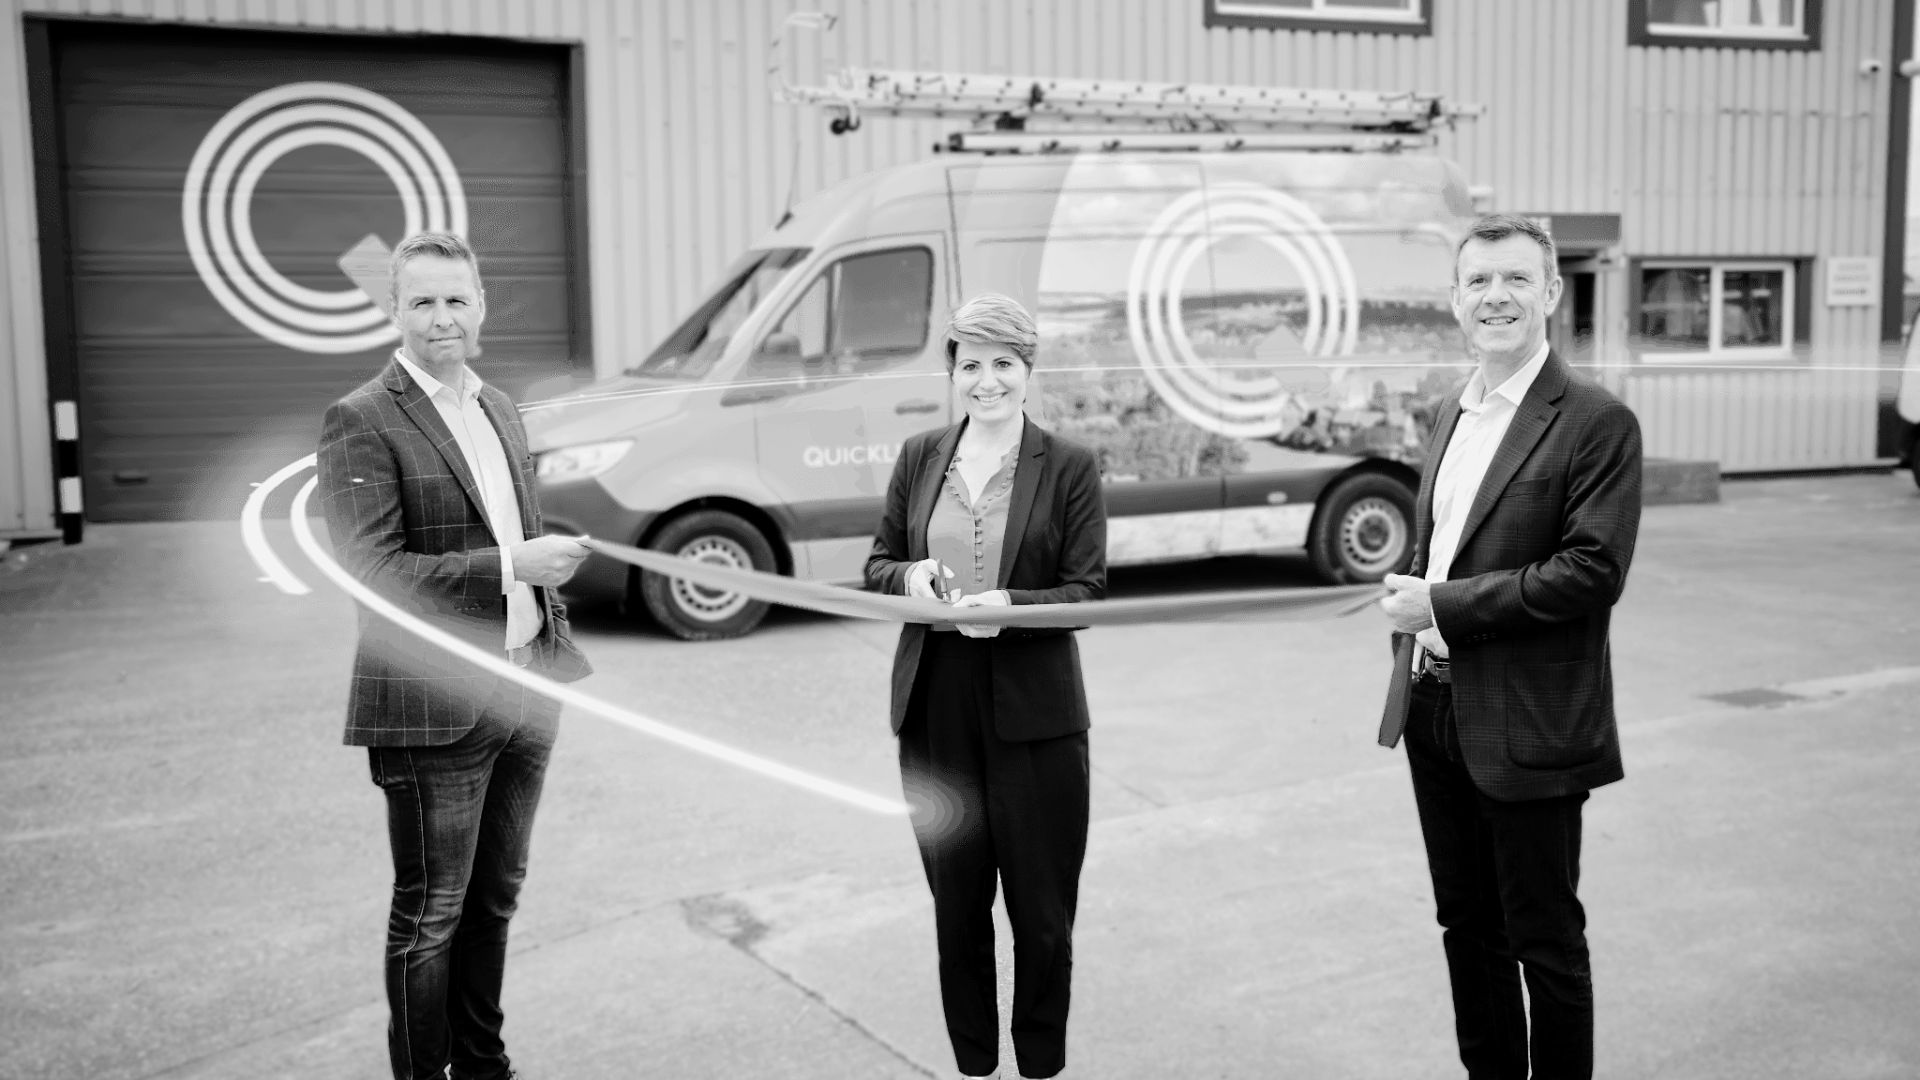 Quickline Expands with New Training and Innovation Centre